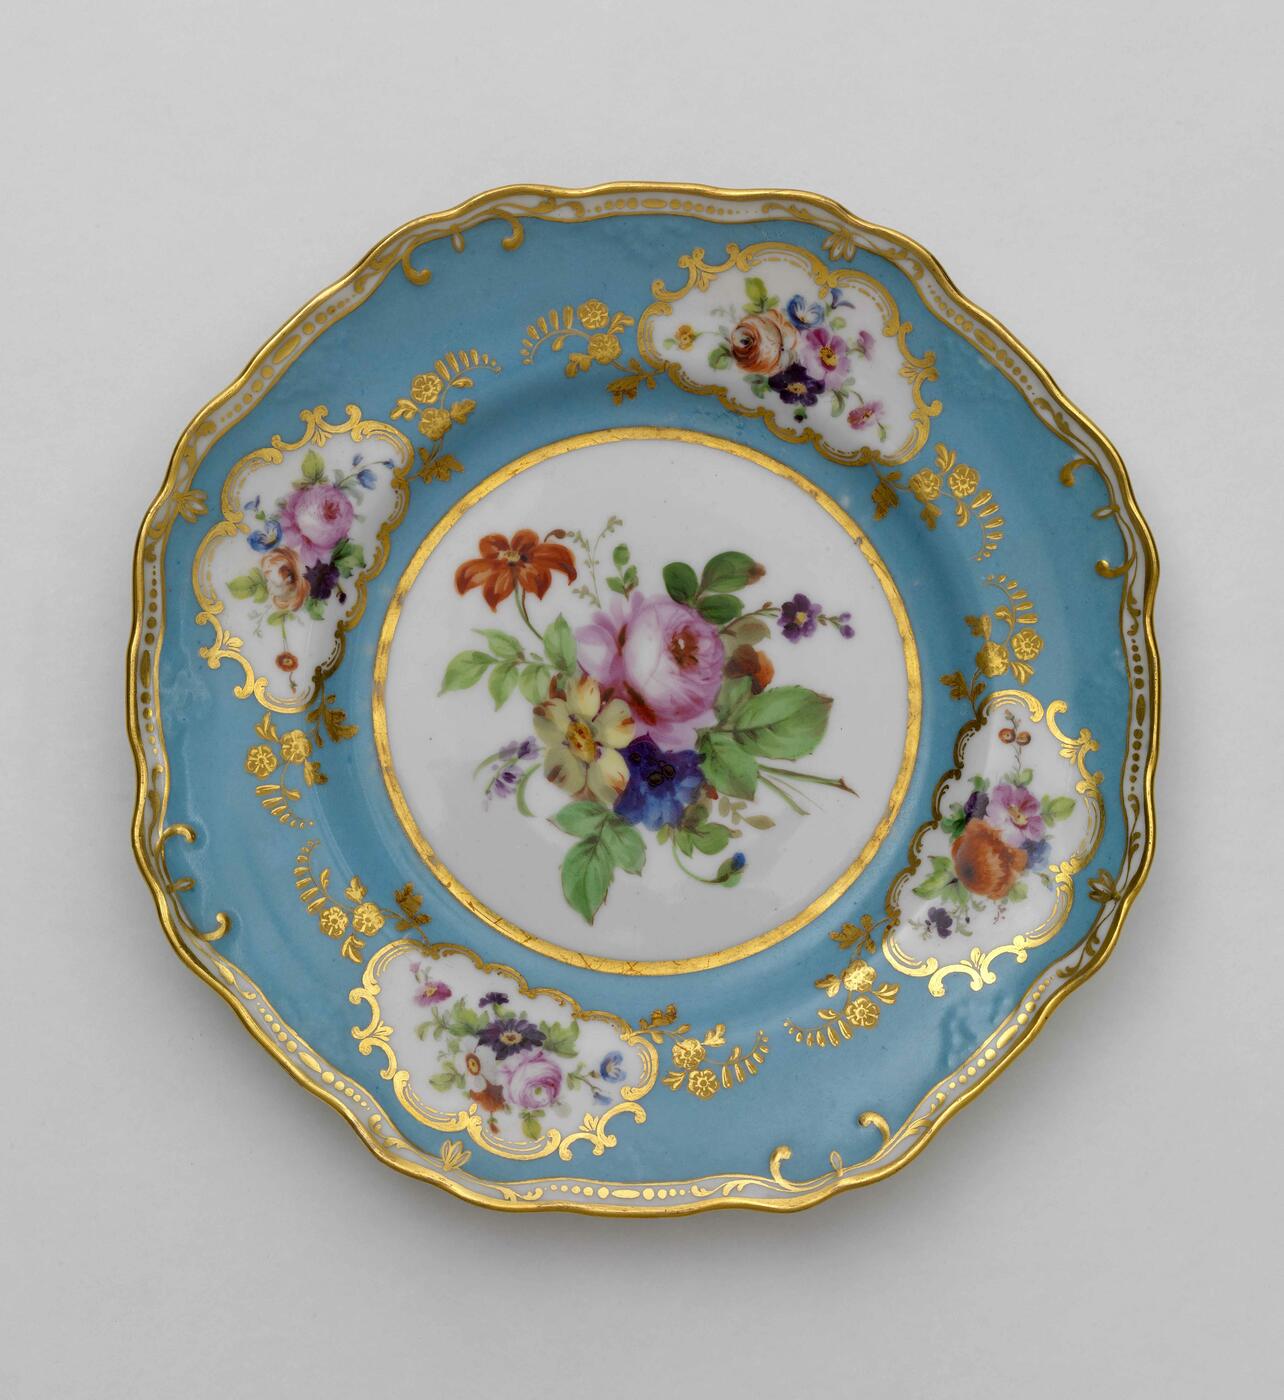 IMPERIAL PORCELAIN MANUFACTORY, ST PETERSBURG, PERIOD OF NICHOLAS I (1825-1855)